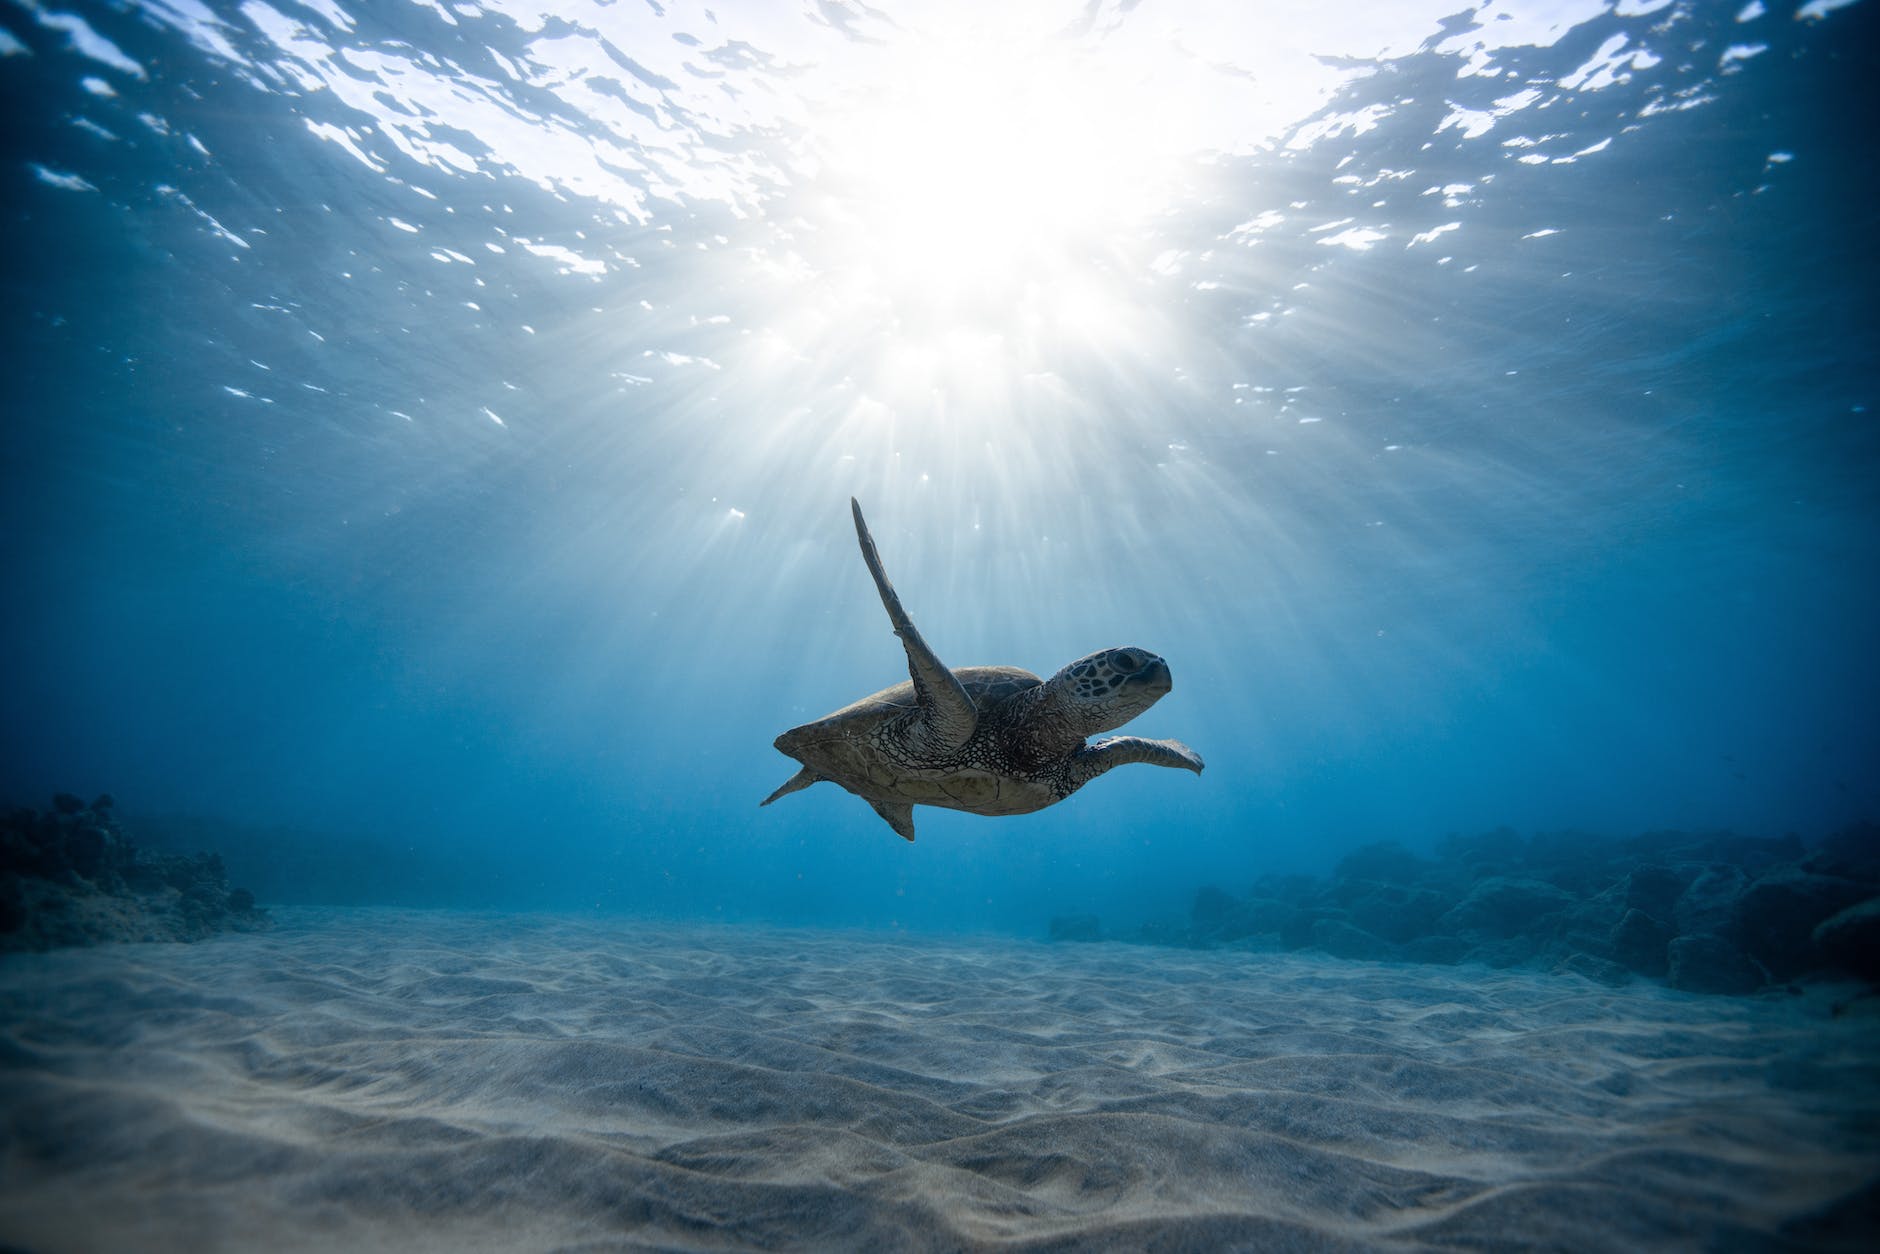 A turtle swimming in the sea, a diver took the image, you can see the sandy floor, some corals in the background and the sun breaks through the water surface from above. They don't appear to be very deep but this could be deceiving.